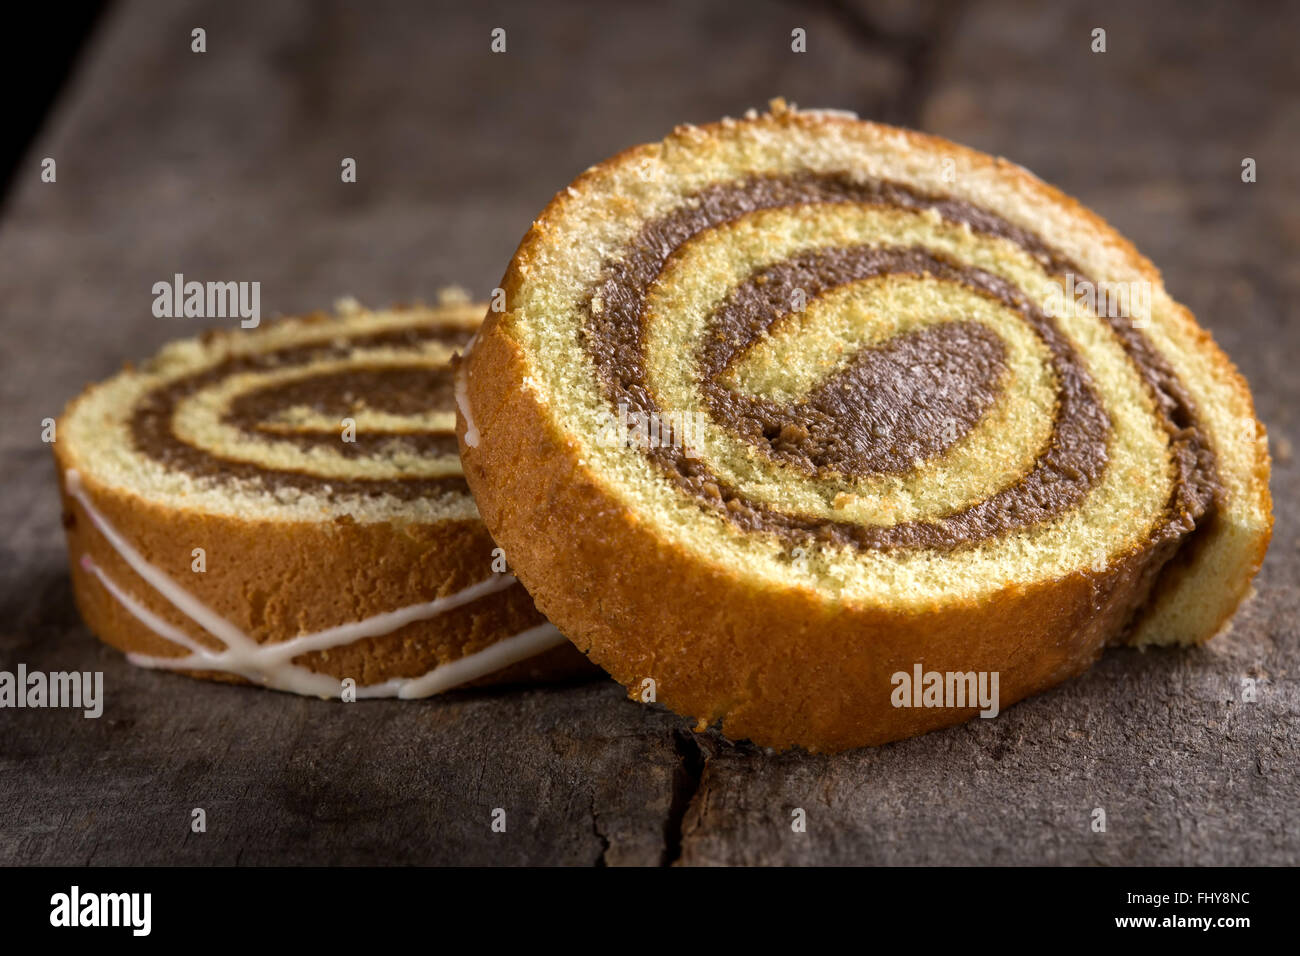 Slices of sponge cake roll over wooden background Stock Photo